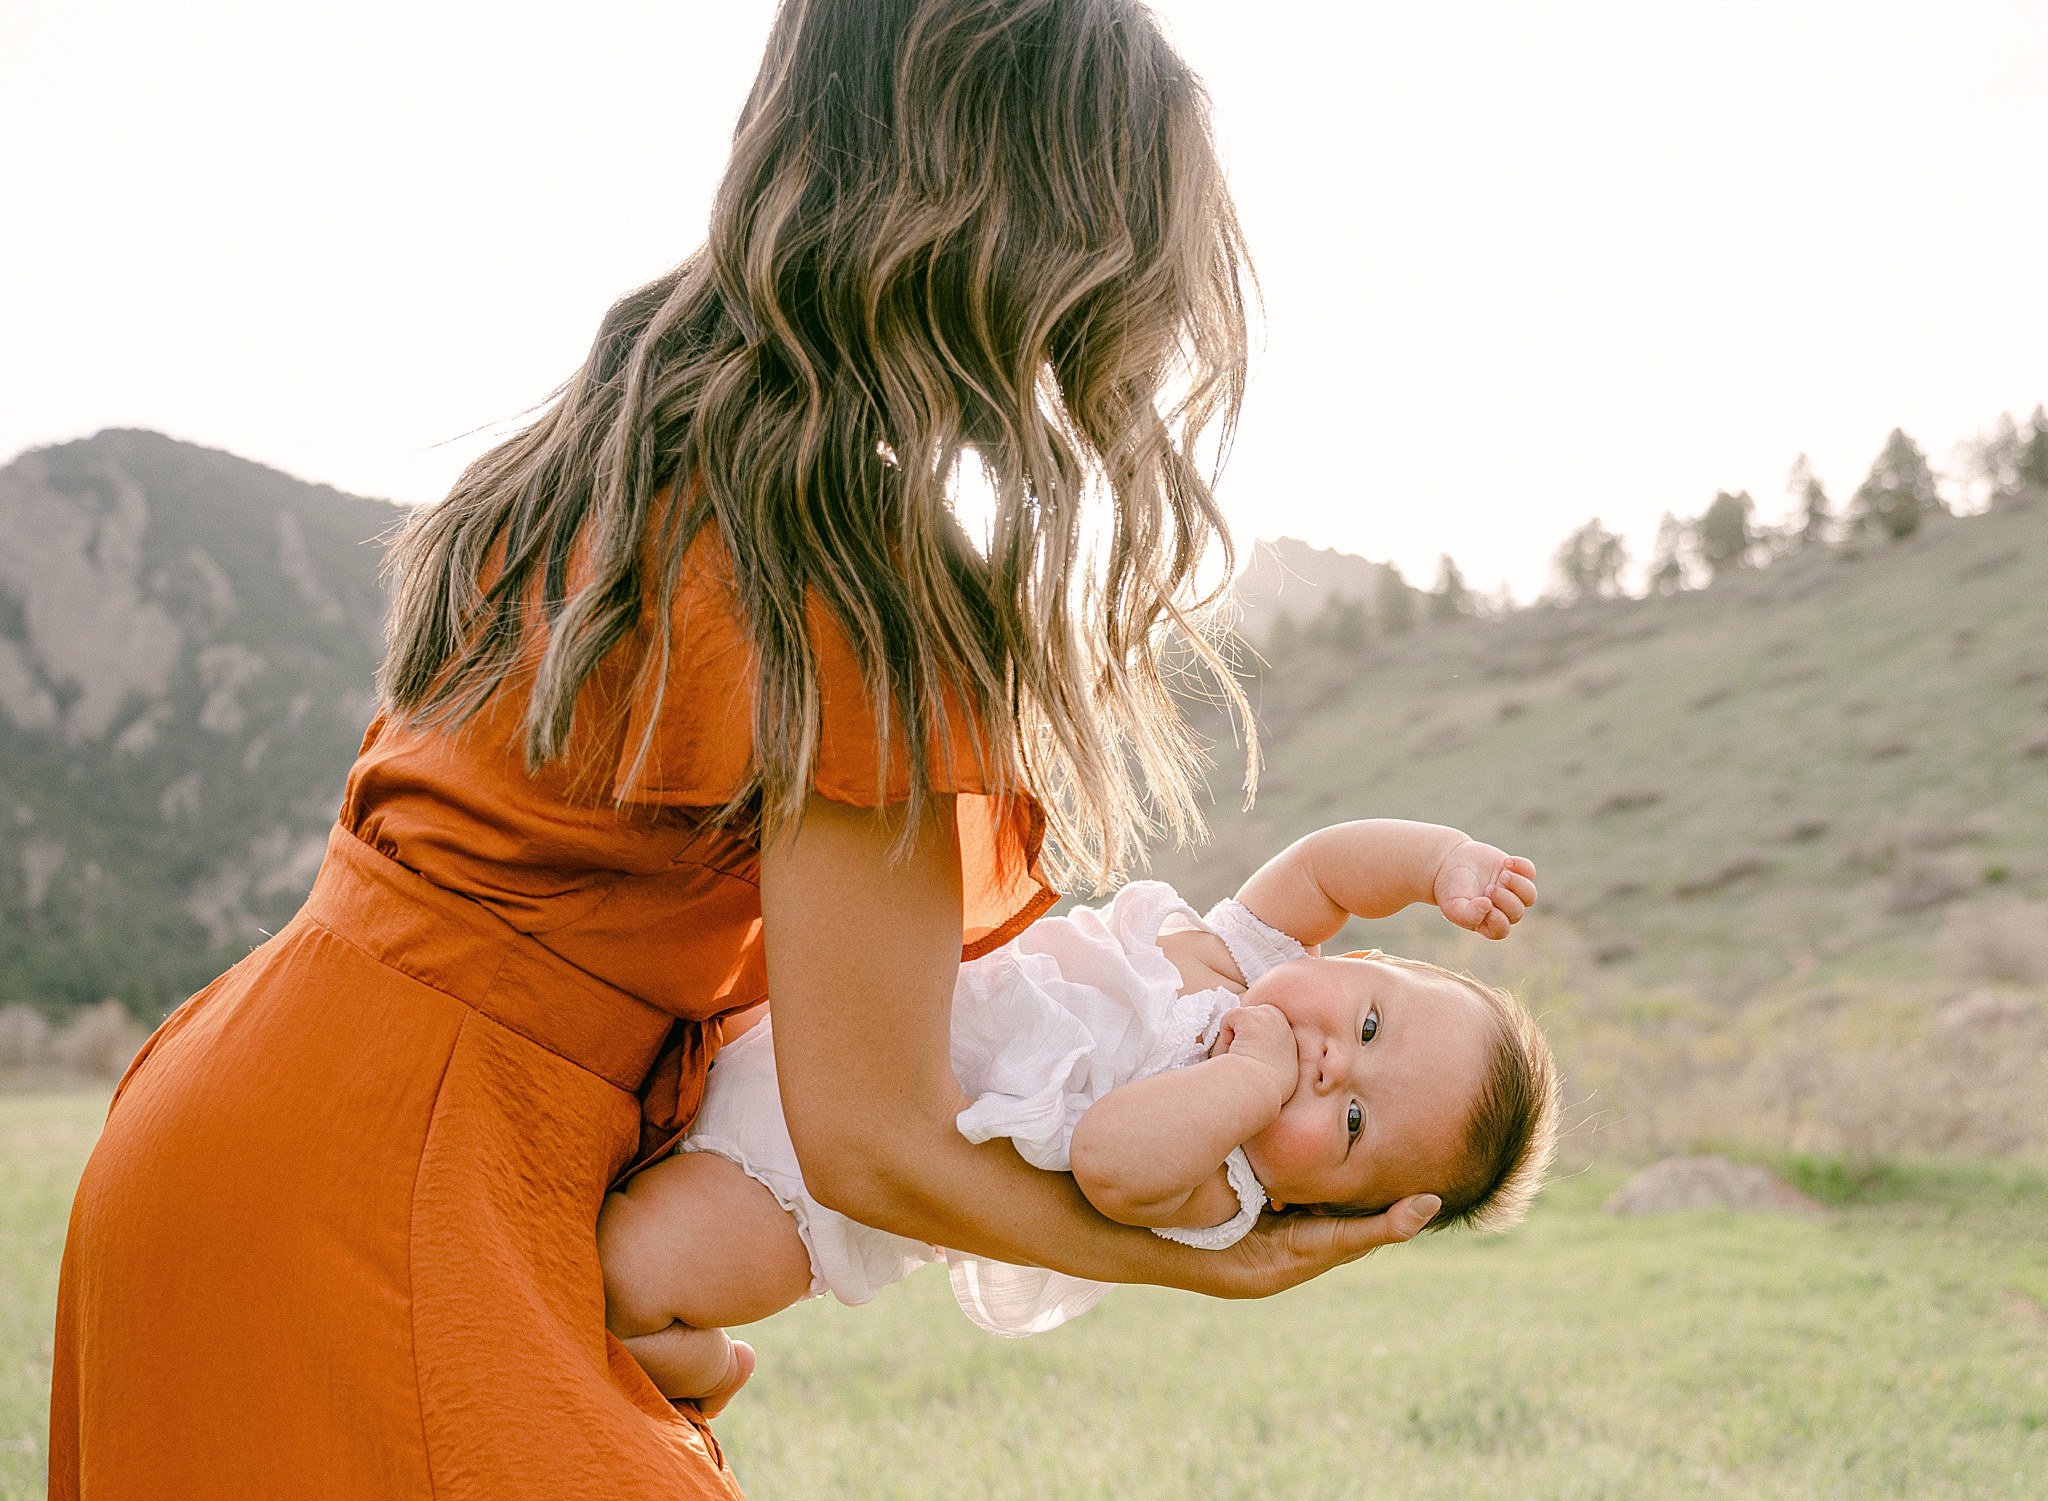 A six month baby waving during a photo session in Boulder, Colorado with mountains in the background.